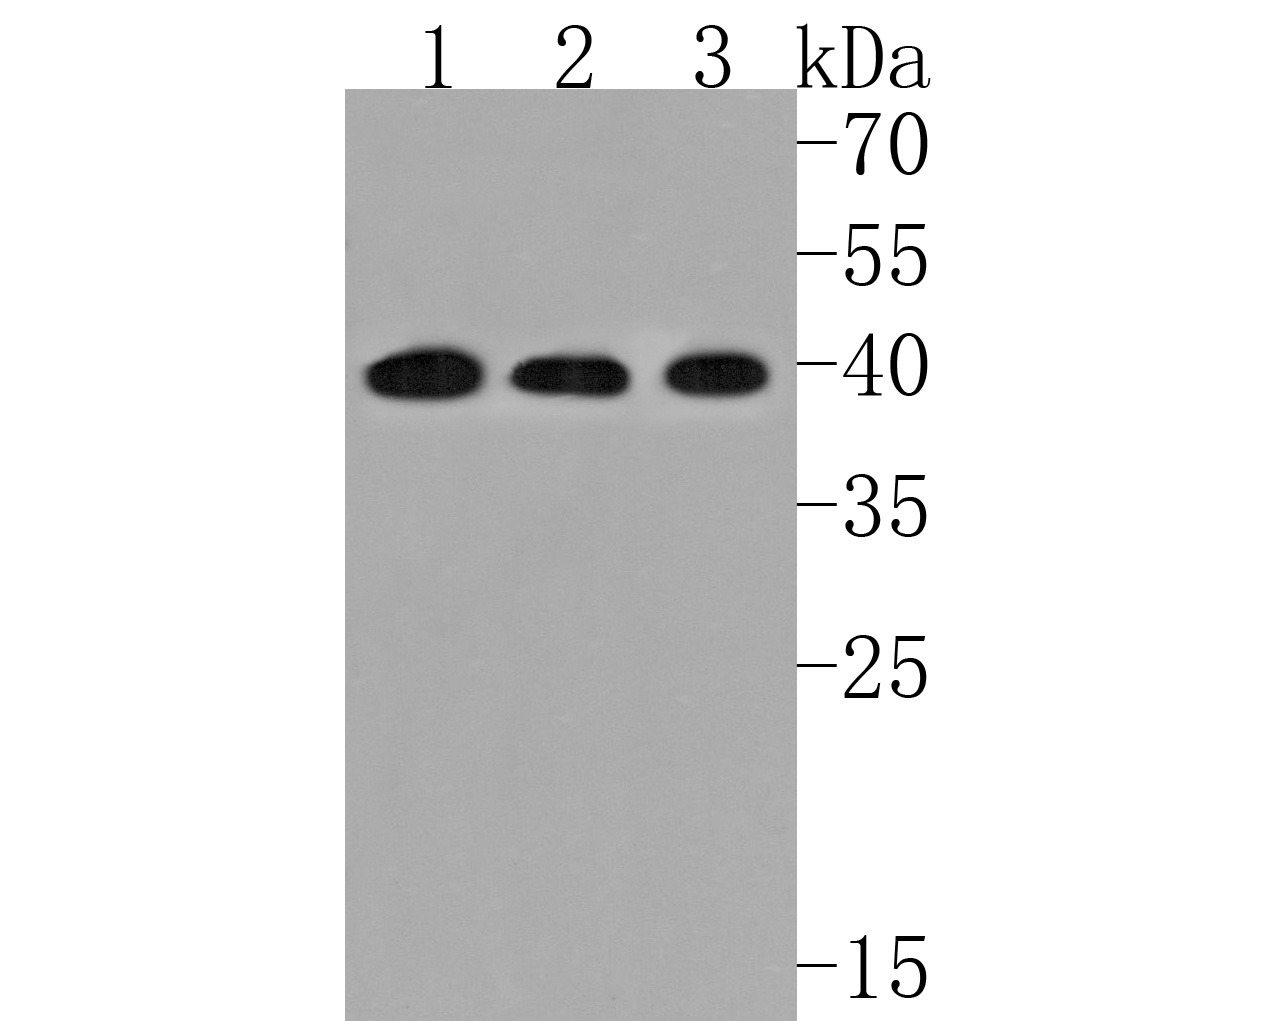 Western blot analysis of EDG2 on different lysates. Proteins were transferred to a PVDF membrane and blocked with 5% NFDM/TBST for 1 hour at room temperature. The primary antibody (HA720080, 1/500) was used in 5% NFDM/TBST at room temperature for 2 hours. Goat Anti-Rabbit IgG - HRP Secondary Antibody (HA1001) at 1:200,000 dilution was used for 1 hour at room temperature.<br />
Positive control: <br />
Lane 1: Jurkat cell lysate<br />
Lane 2: Hela cell lysate<br />
Lane 3: A549 cell lysate